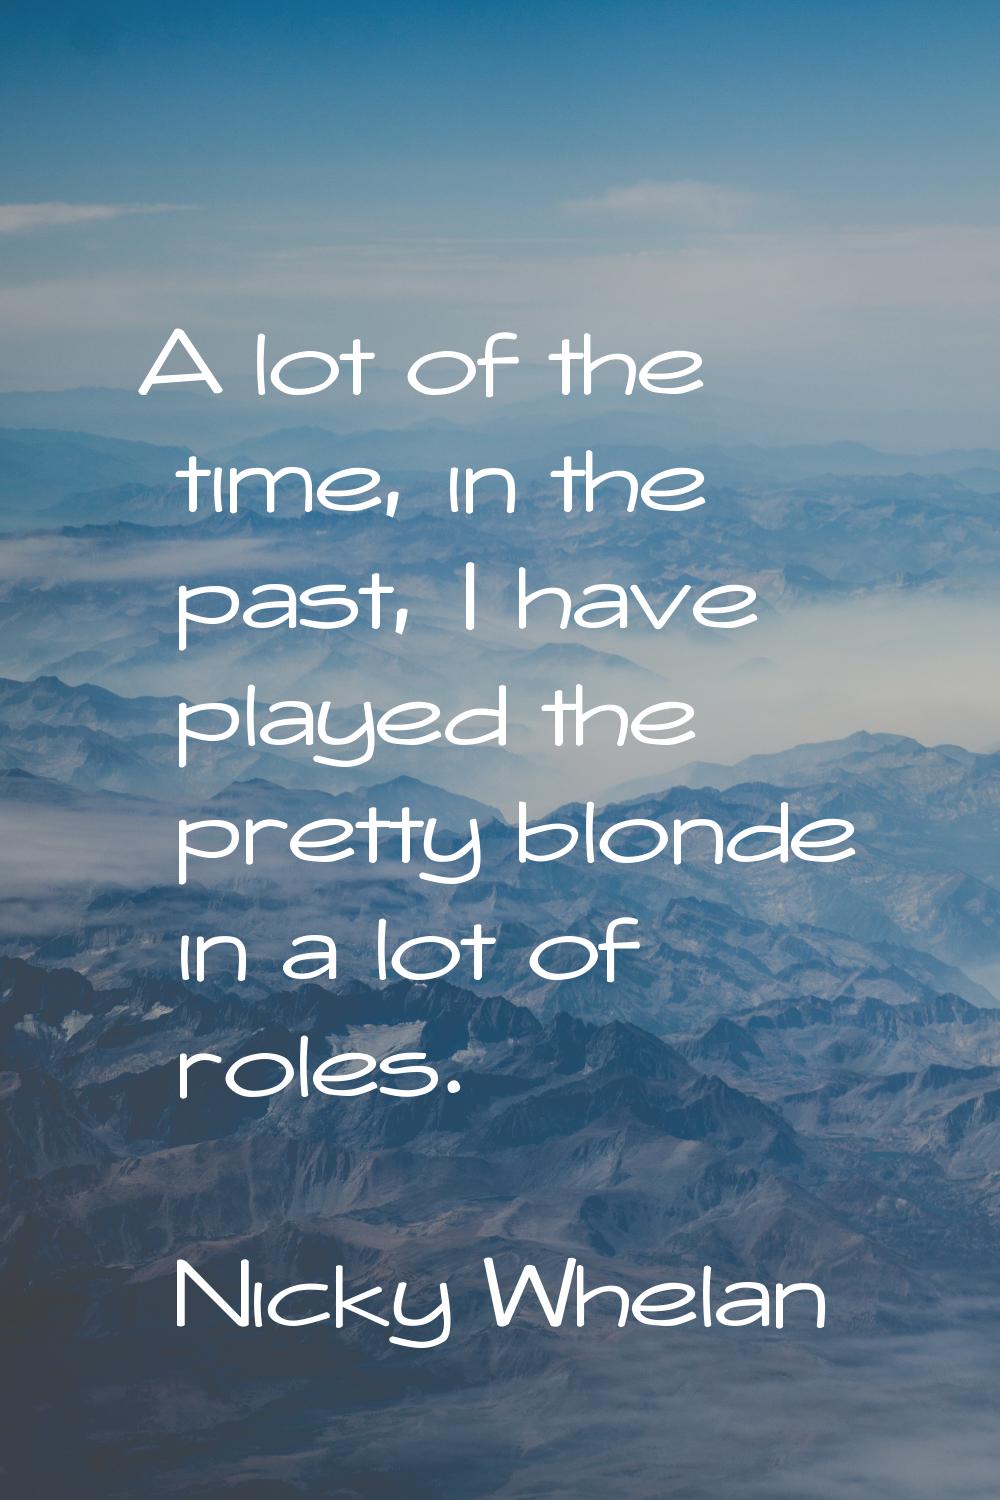 A lot of the time, in the past, I have played the pretty blonde in a lot of roles.